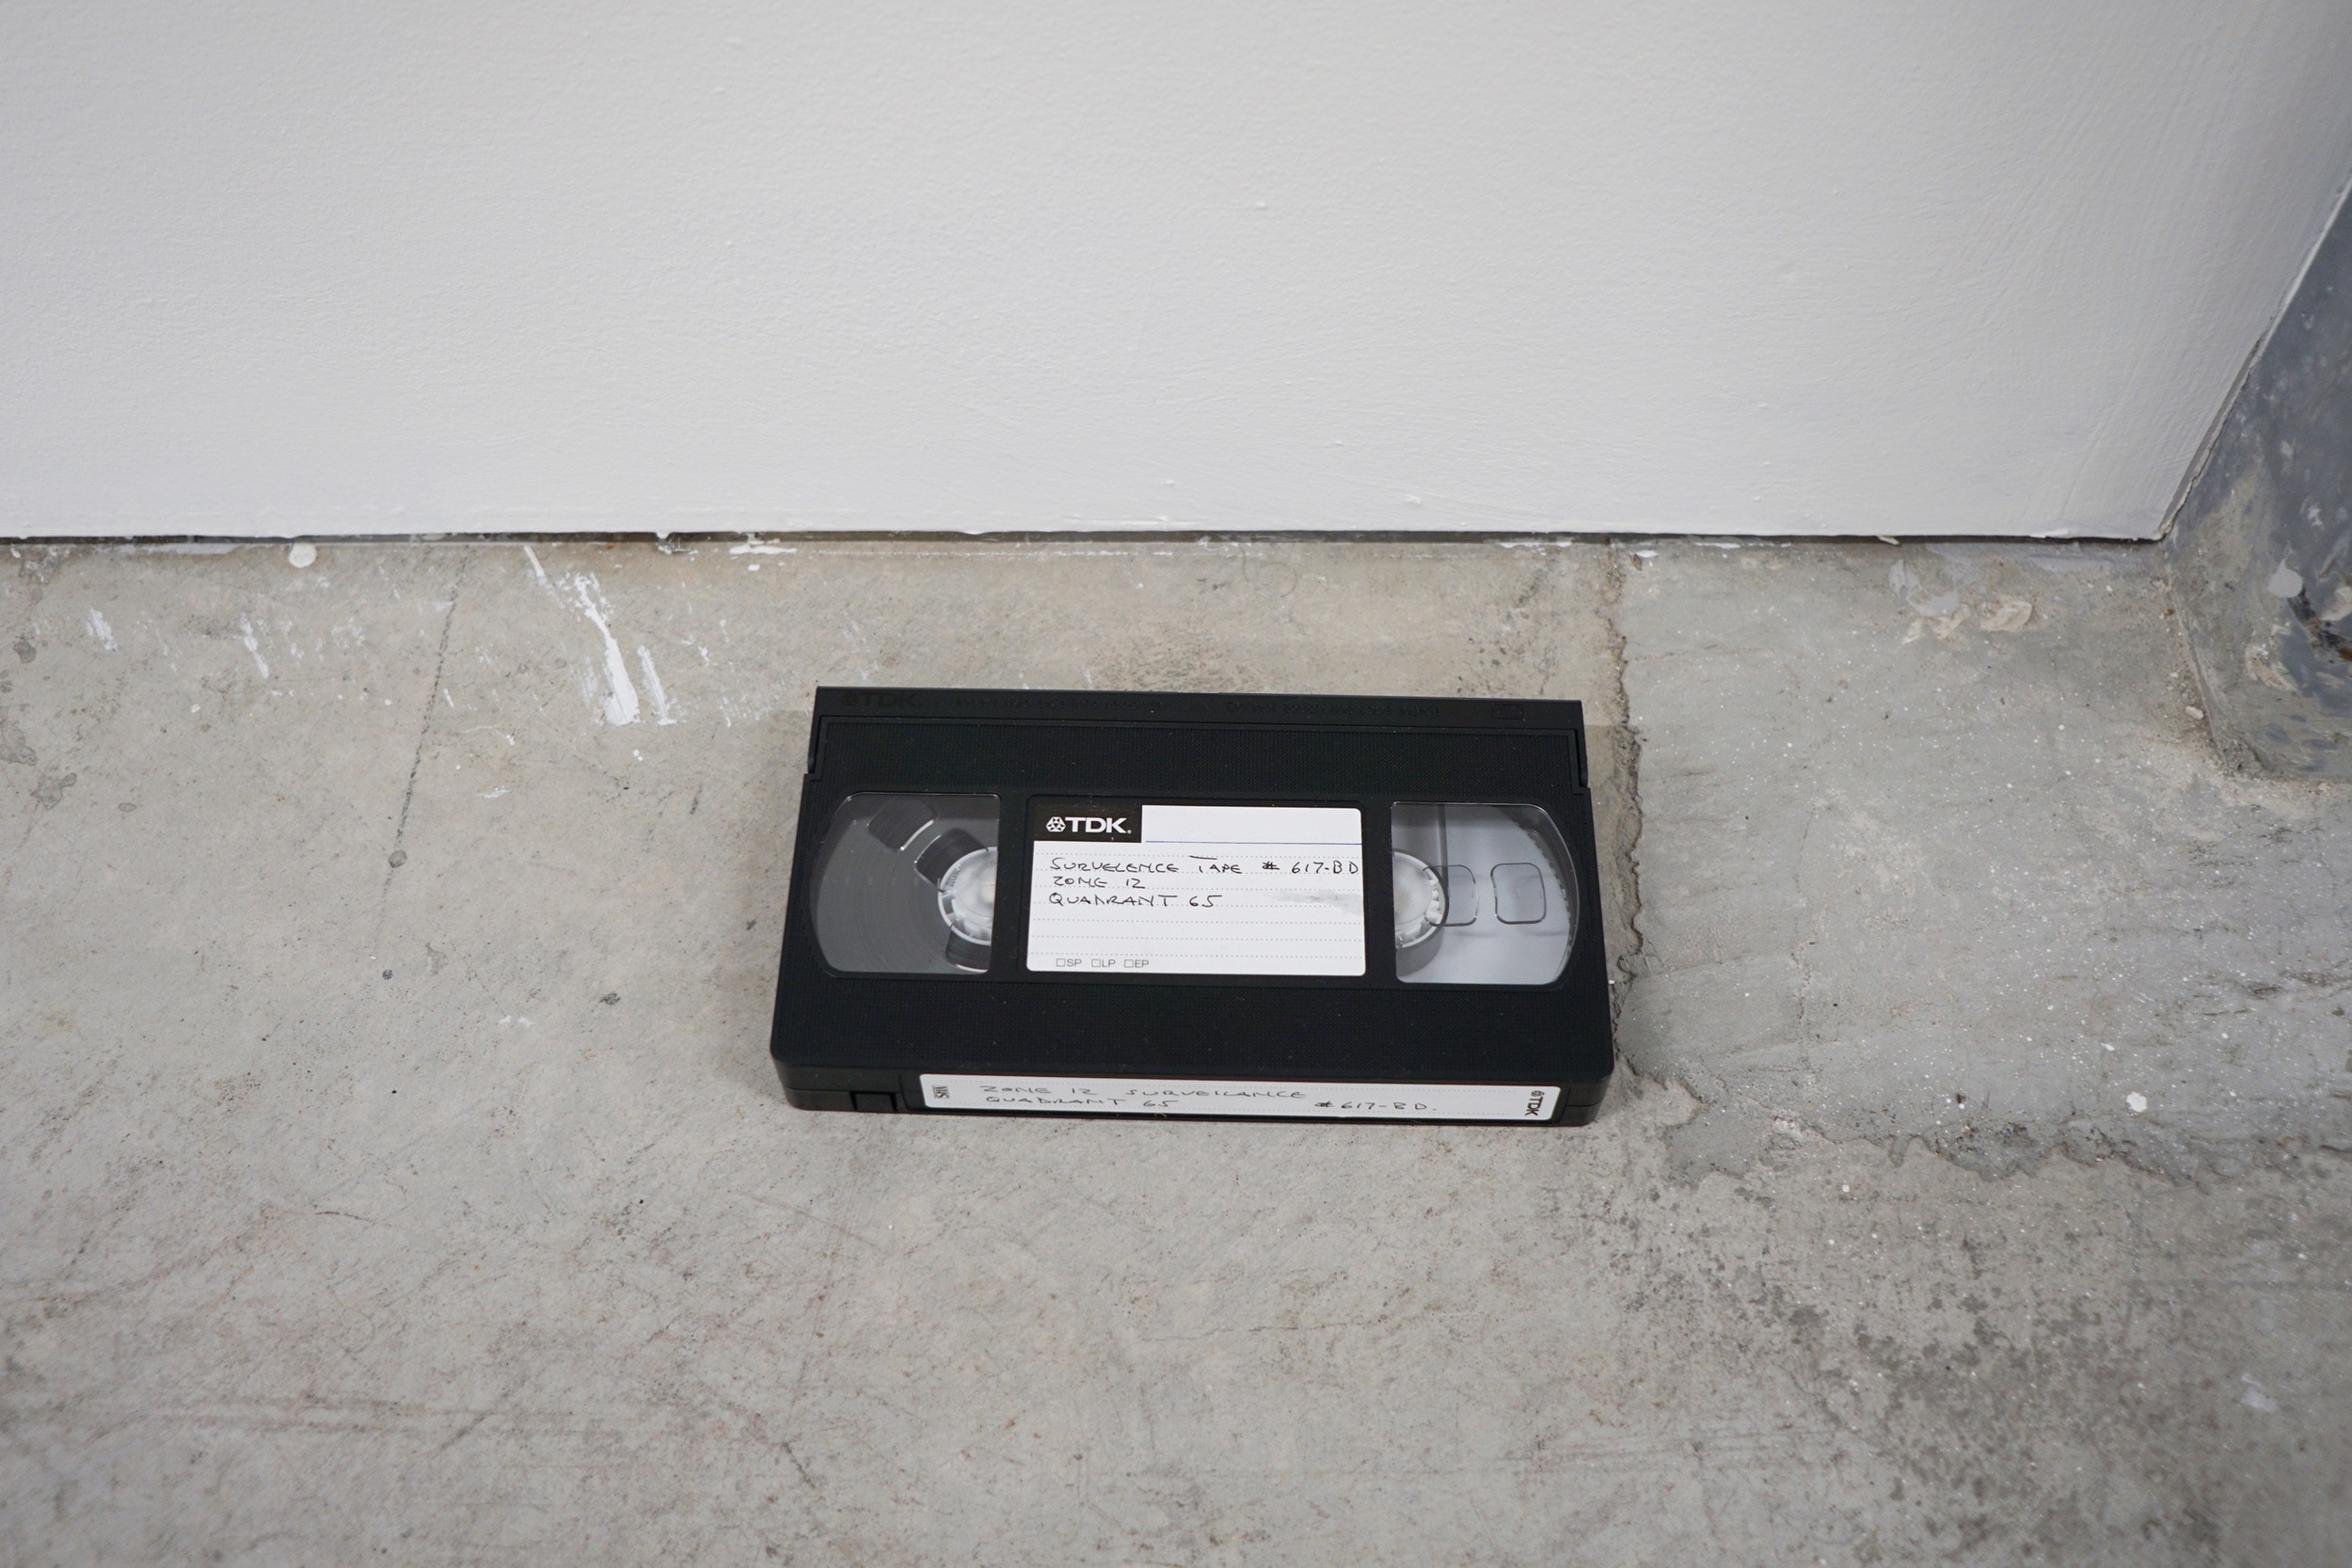  Anthony Discenza  Untitled (Surveillance Tape) , 2017 VHS surveillance tape used in production of 2004 film  The Terminal  